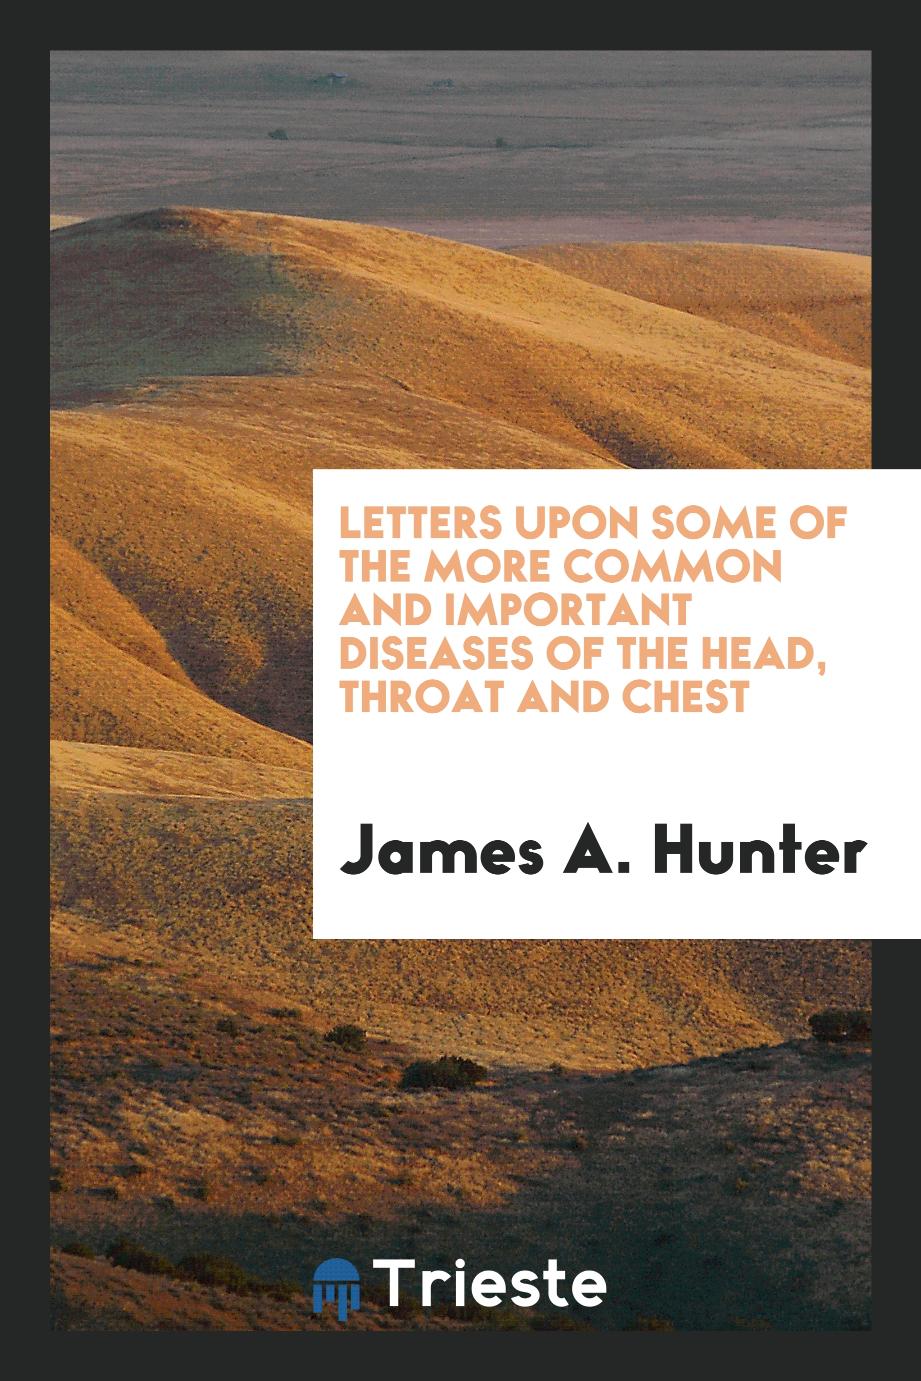 Letters upon some of the more common and important diseases of the head, throat and chest